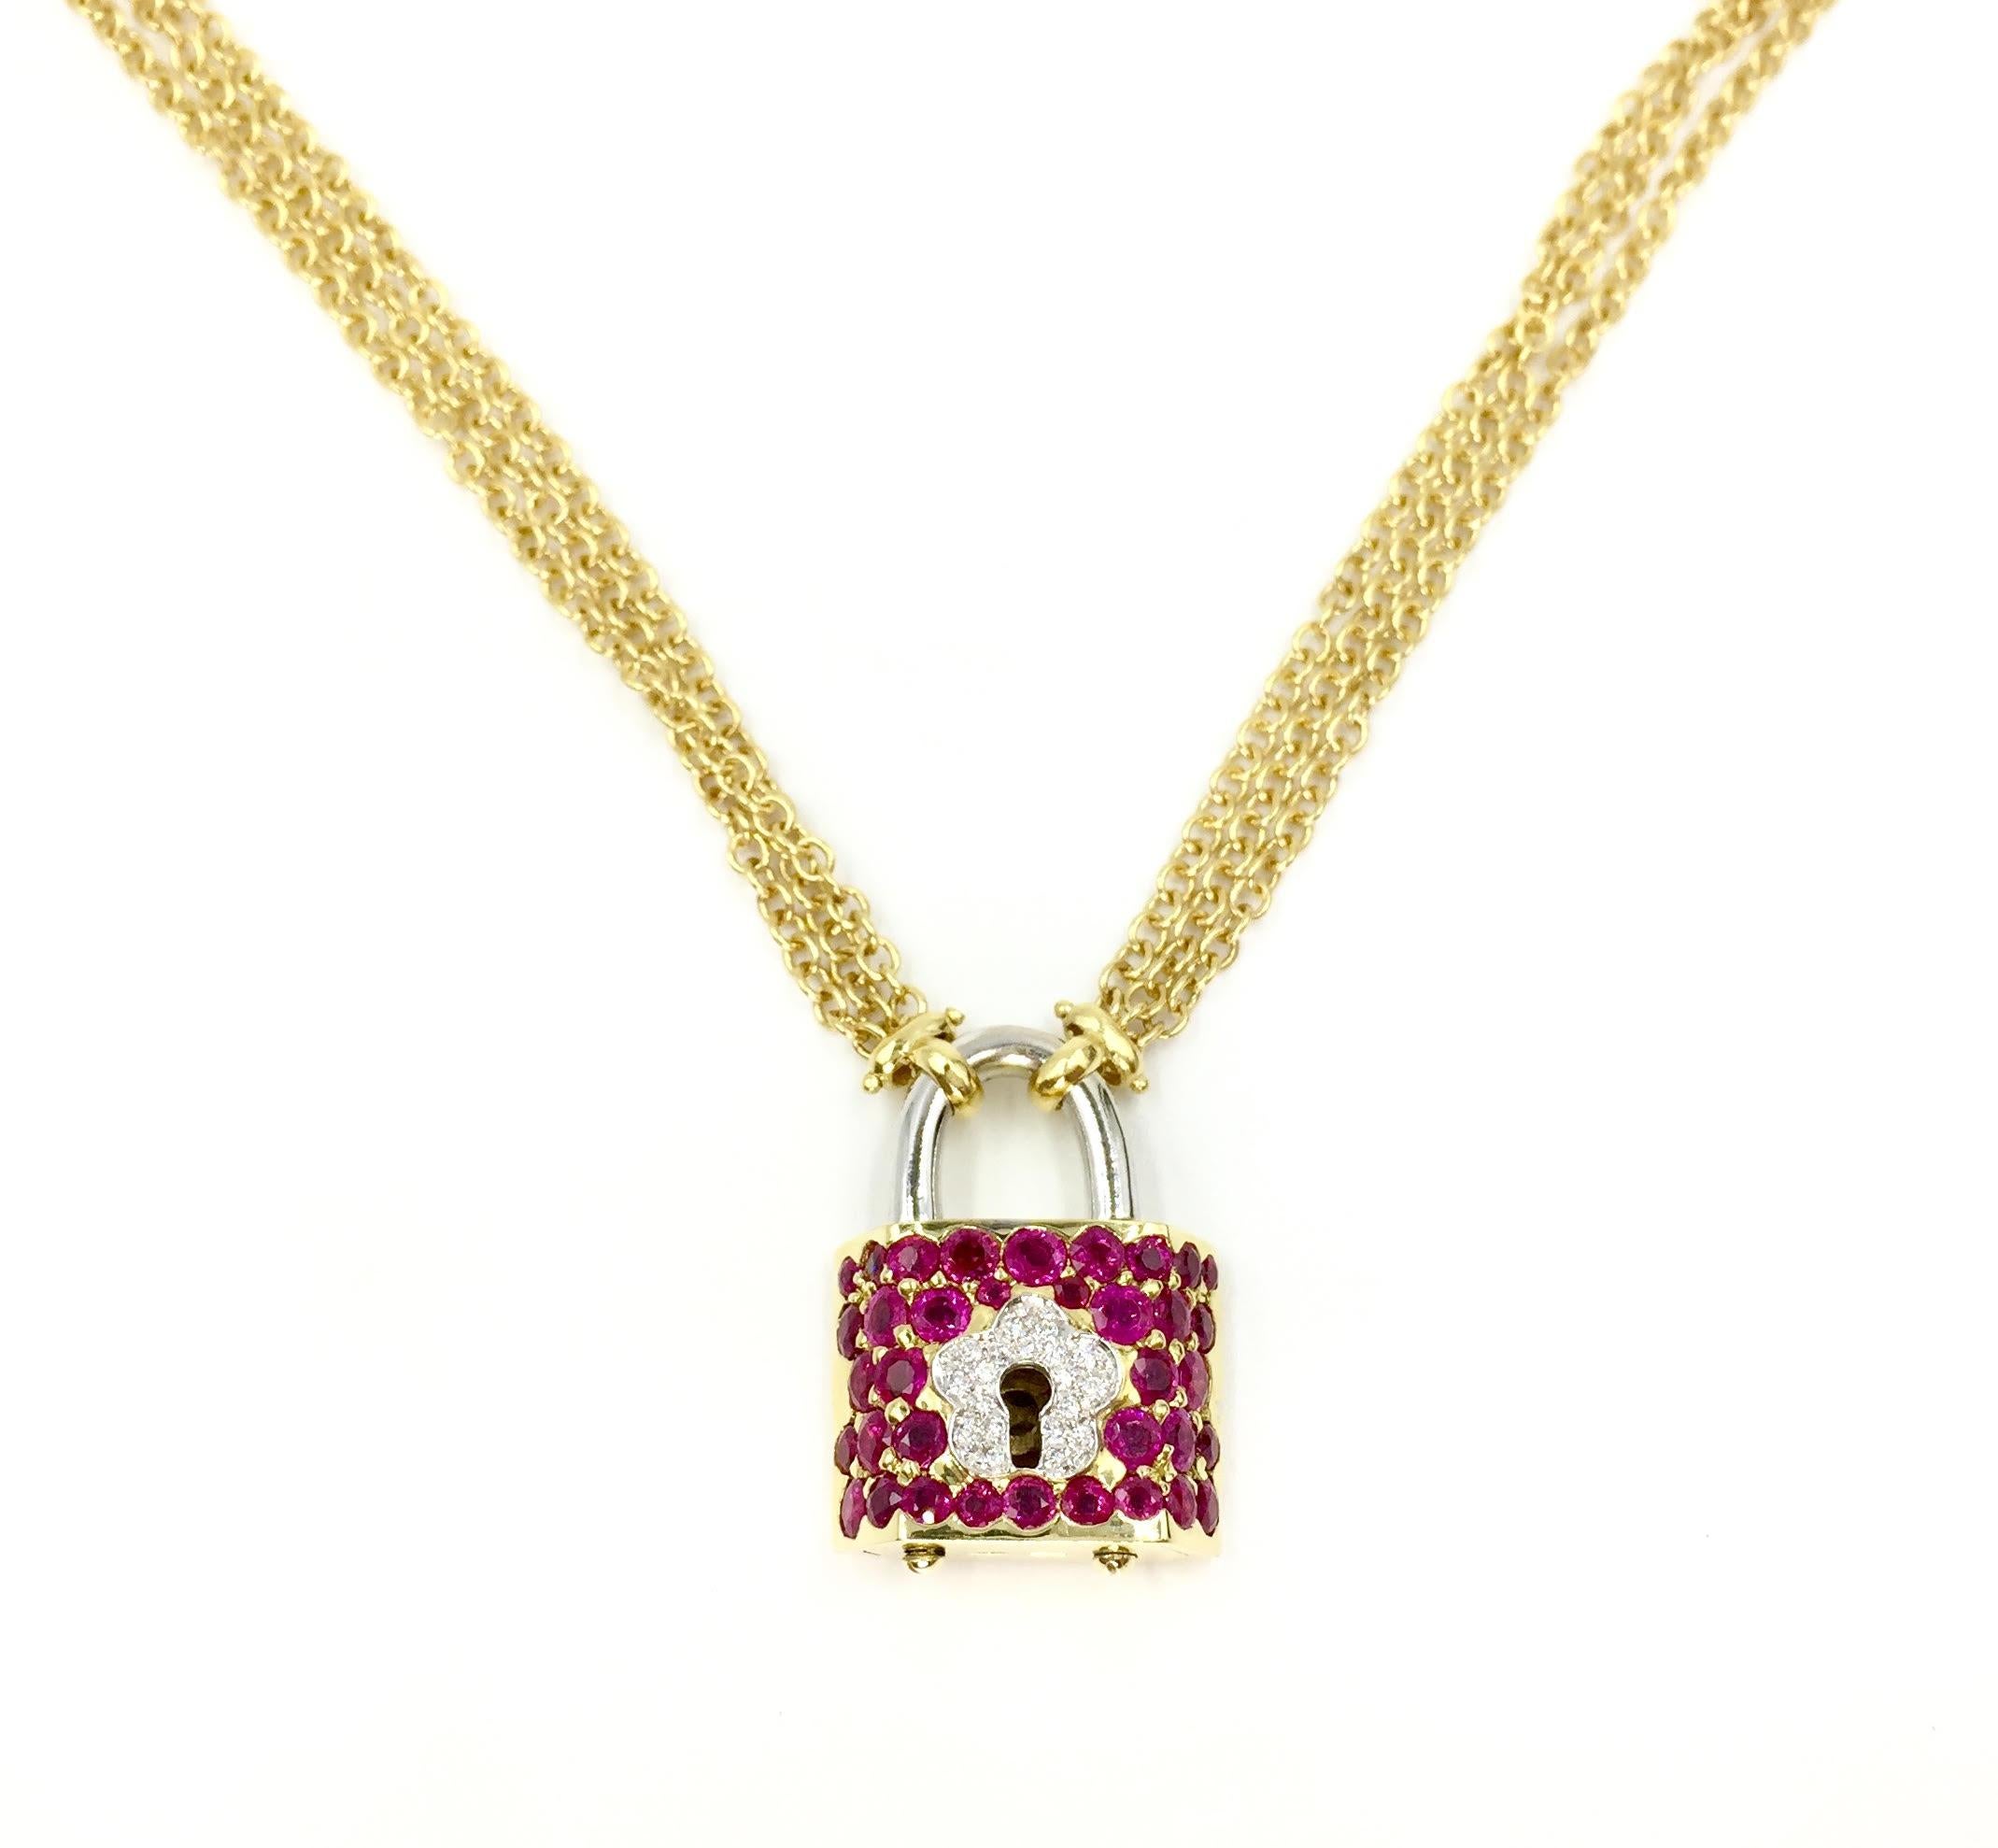 Circa 1990, this high quality ruby and diamond encrusted two tone padlock pendant actually opens and closes with the 18k yellow gold key. The necklace can be worn with or without the dangling petite key. 34 gorgeous round rubies have an approximate